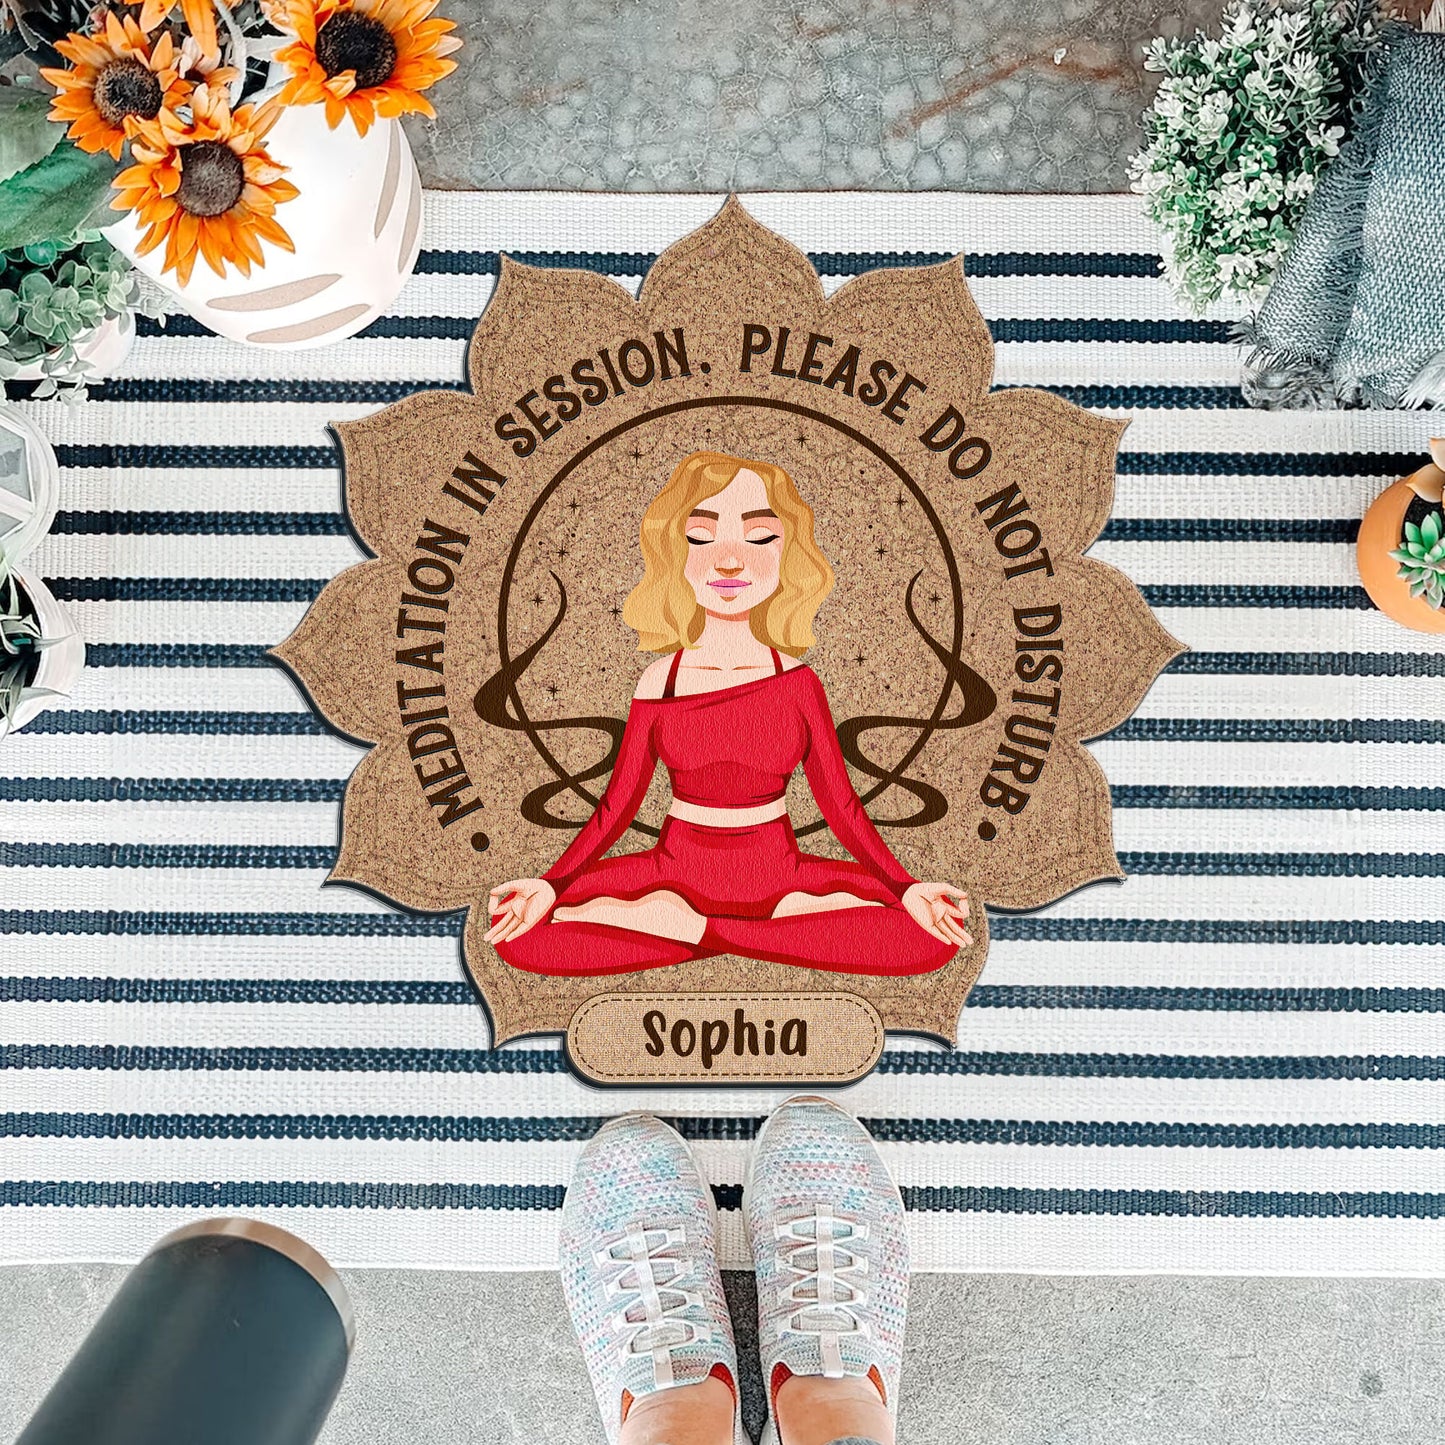 Meditation In Session. Please Do Not Disturb - Personalized Custom Shaped Doormat